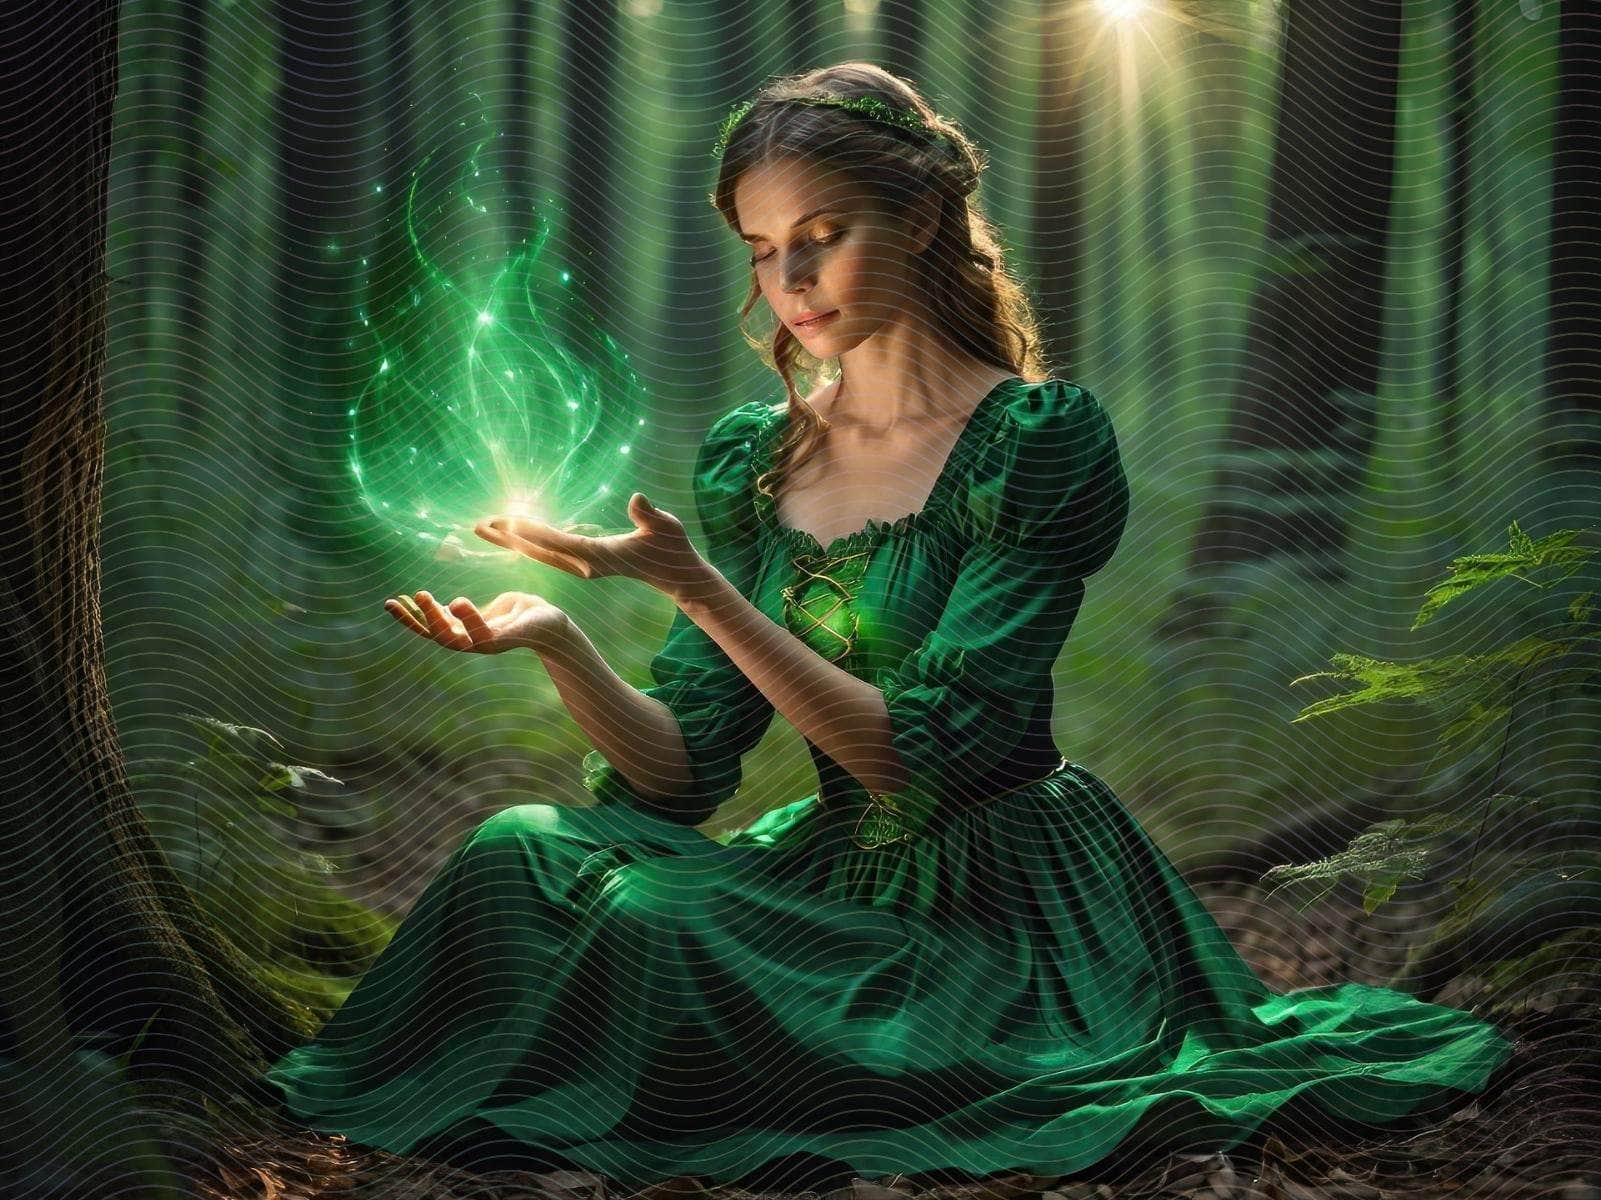 A Woman in Green Dress Sitting in the Woods Casting Magic